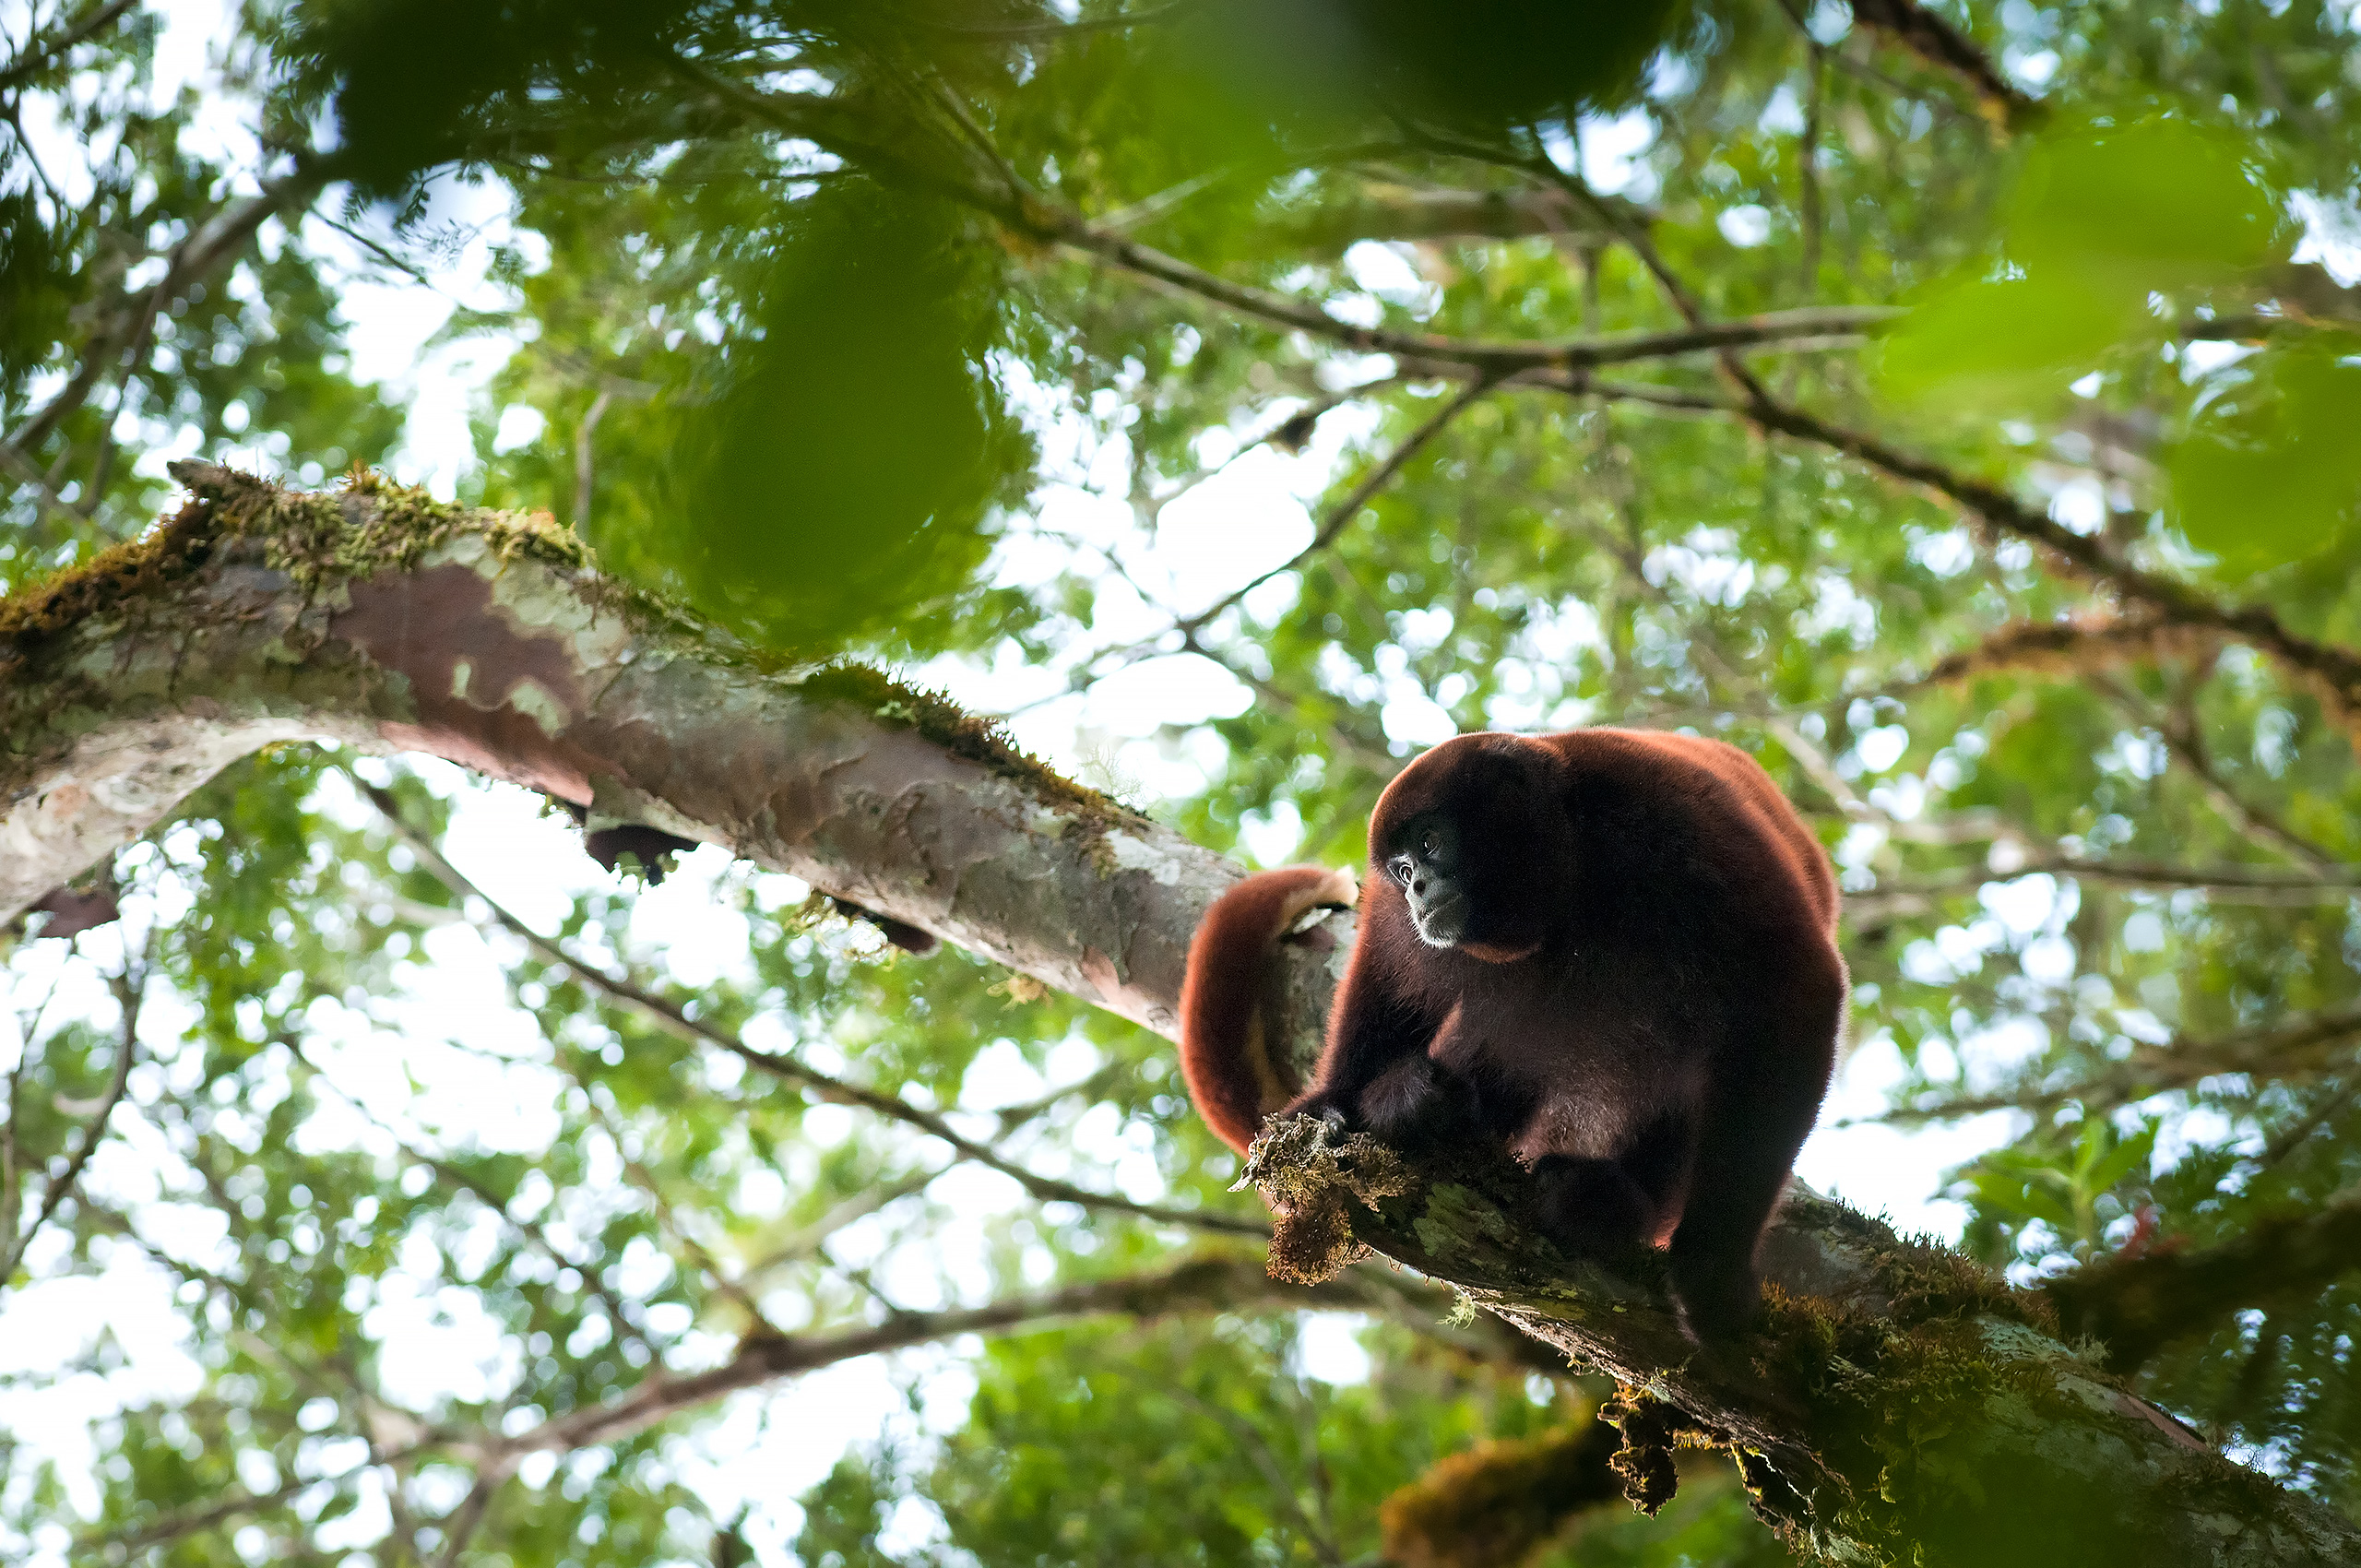 A yellow-tailed woolly monkey standing on a tree